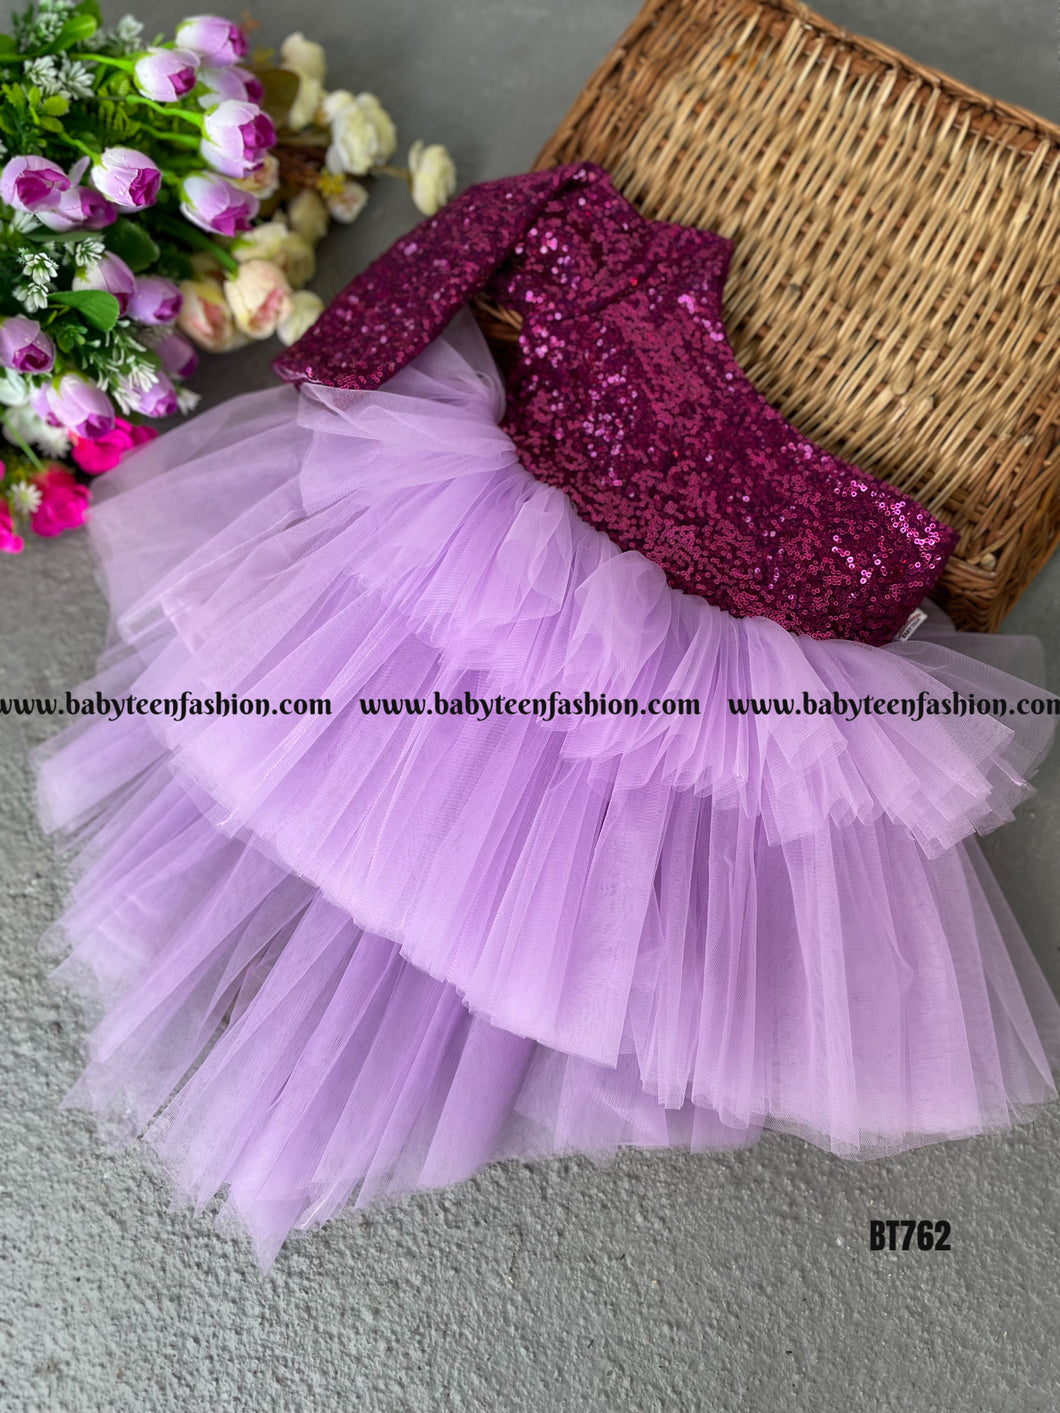 BT762 Lavender Sequin Twirl Dress - Sparkle with Every Step!